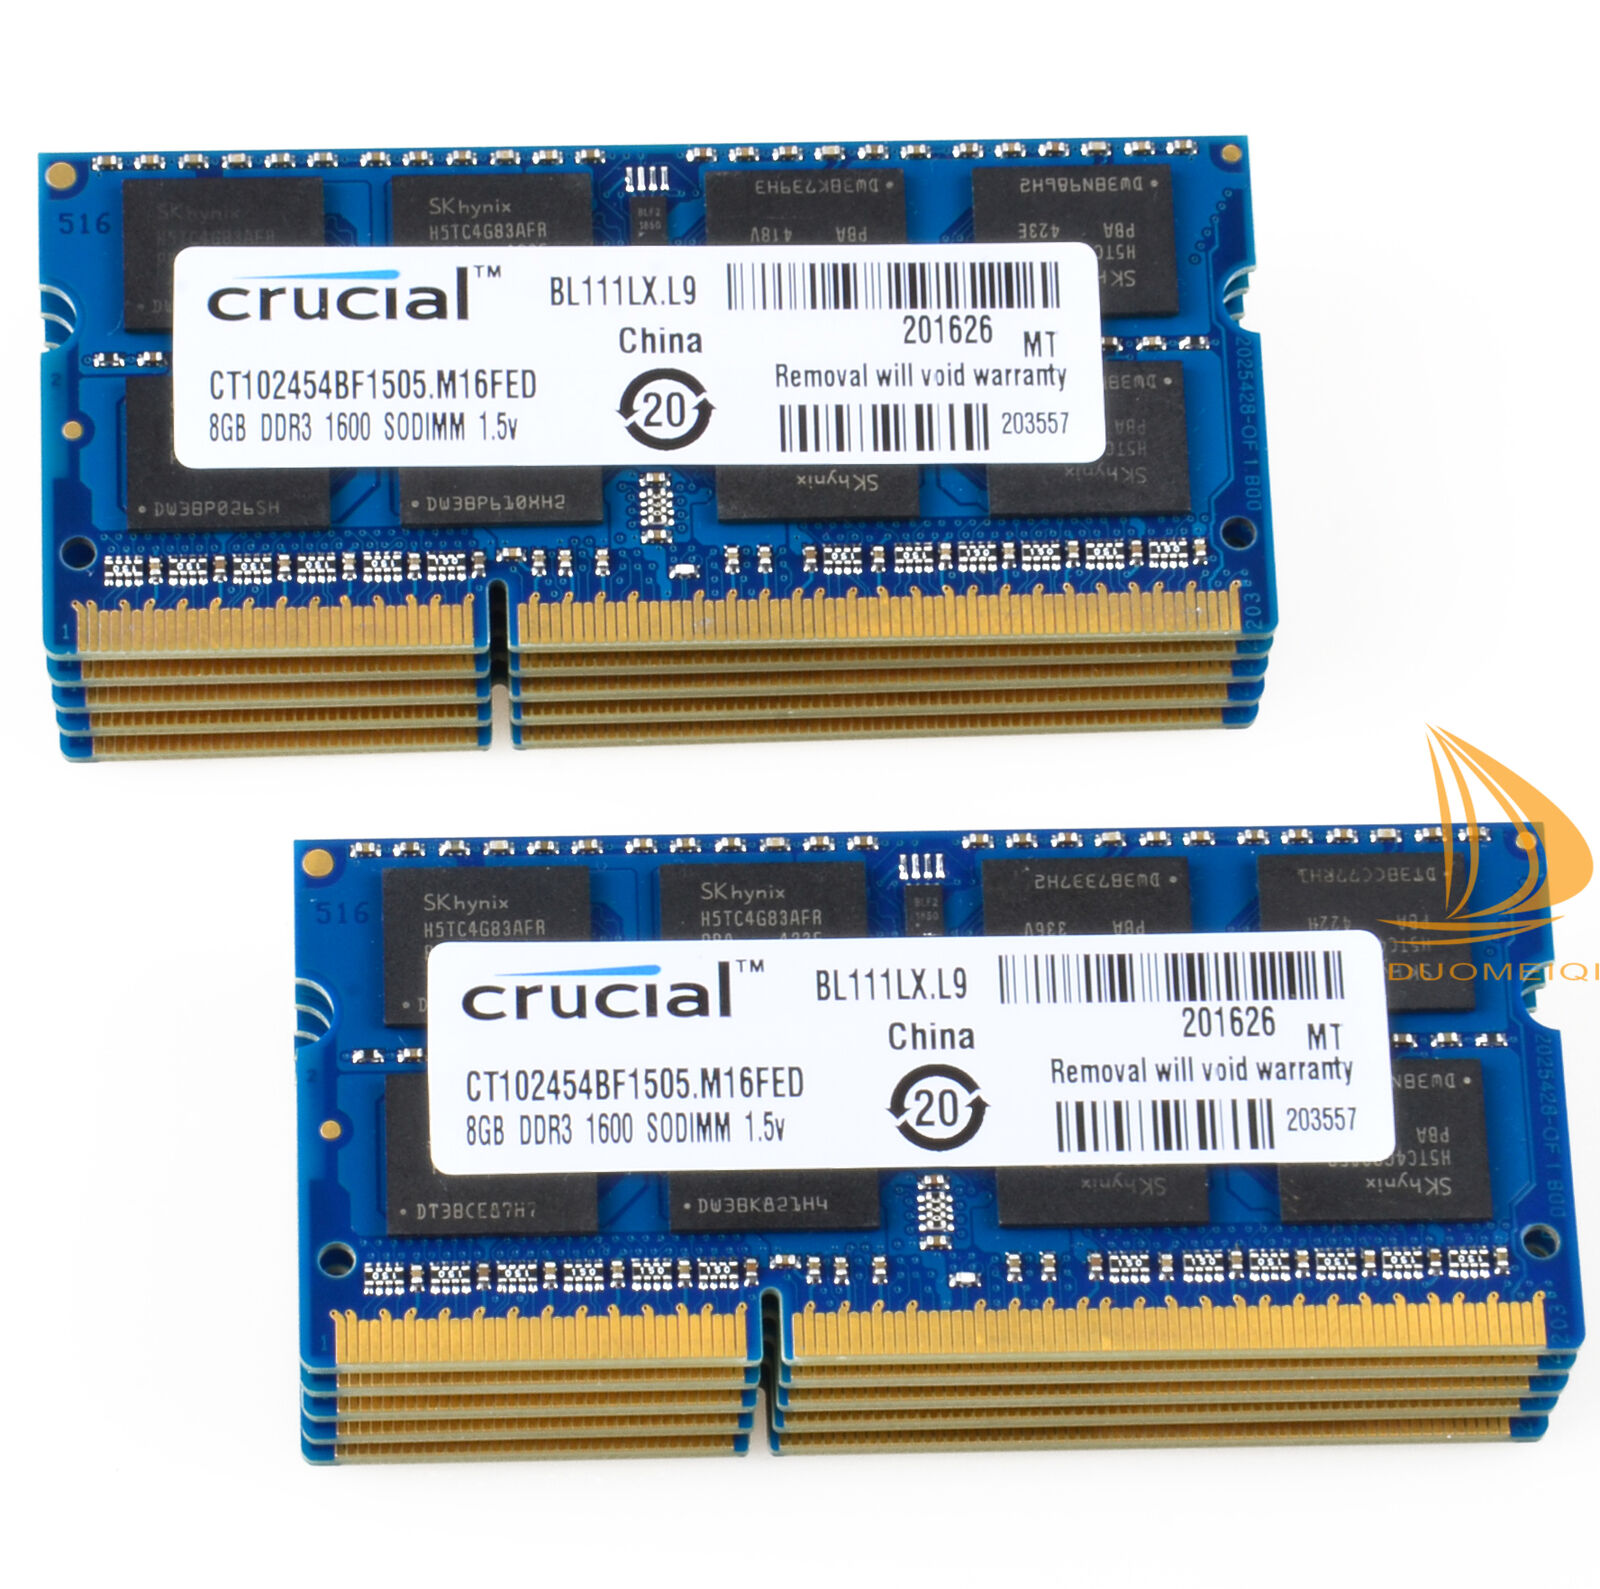 Crucial 10x 8GB 2Rx8 PC3-12800S DDR3 1600Mhz SODIMM RAM Laptop Memory CL11 $WE0